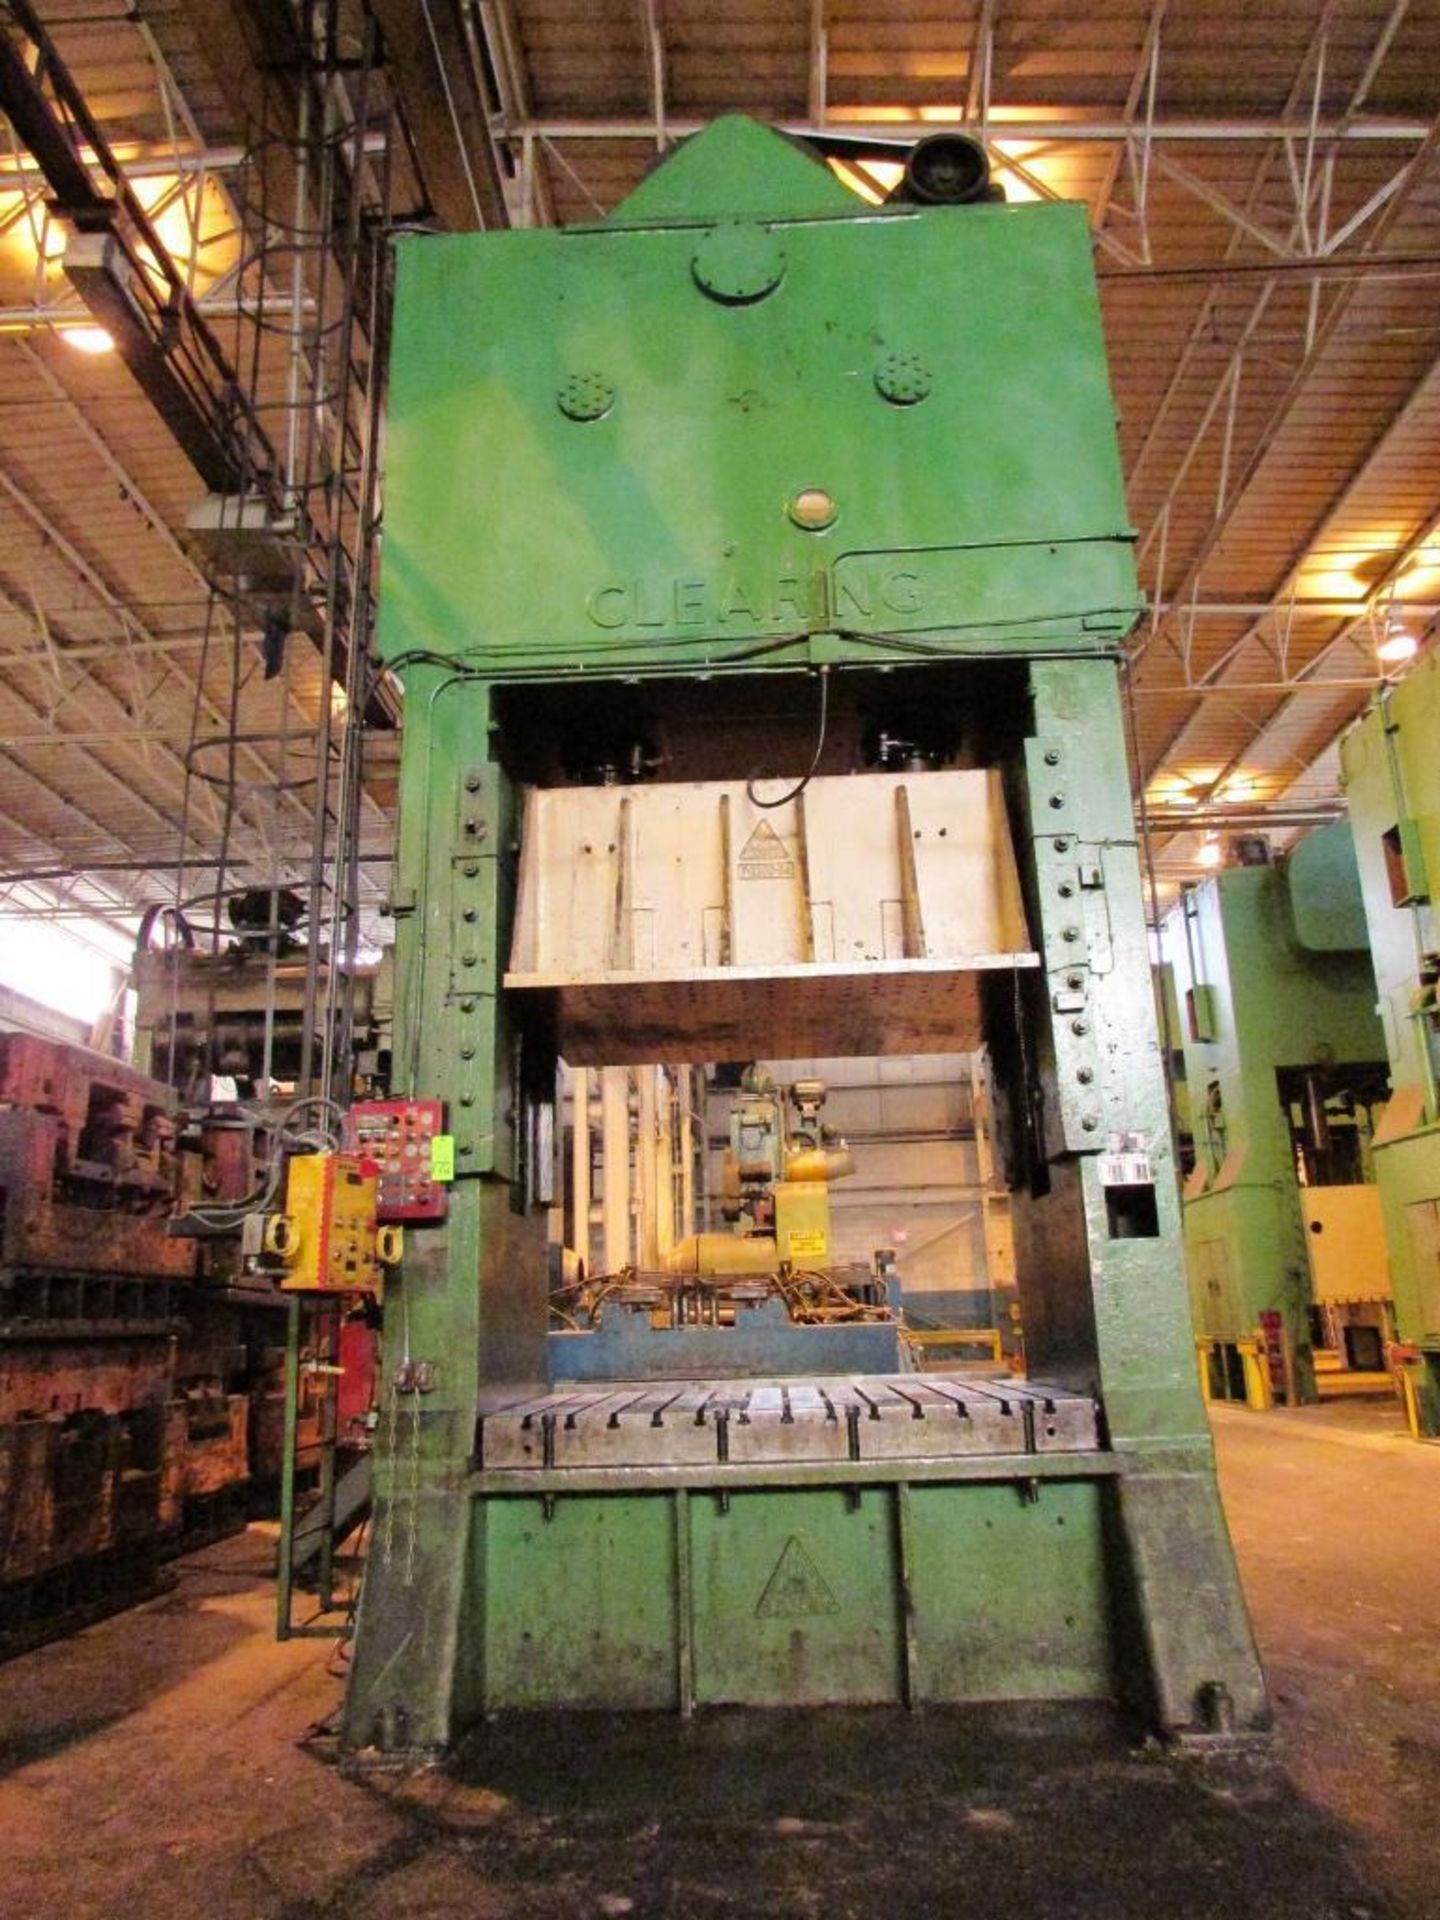 Clearing F2-350-84 350 Ton Two Point Eccentric Straight Side Press - Image 2 of 17